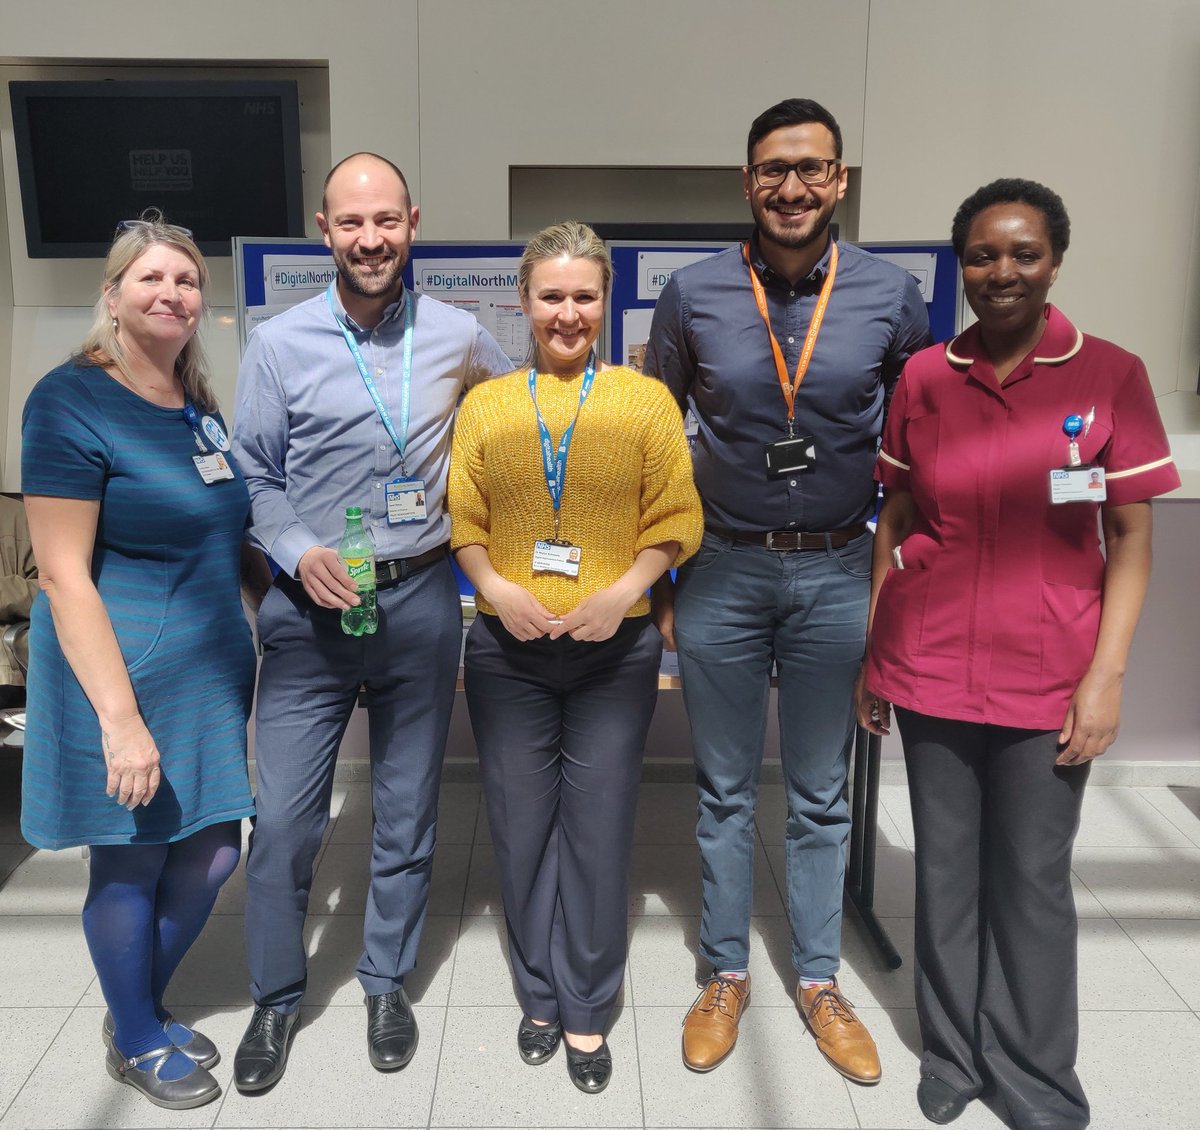 Come along to the #DigitalNorthMid stall in the atrium to learn about our exciting new systems careflow connect and e Vitals @corrina_hulkes @dwlstacey @NorthMidNHS